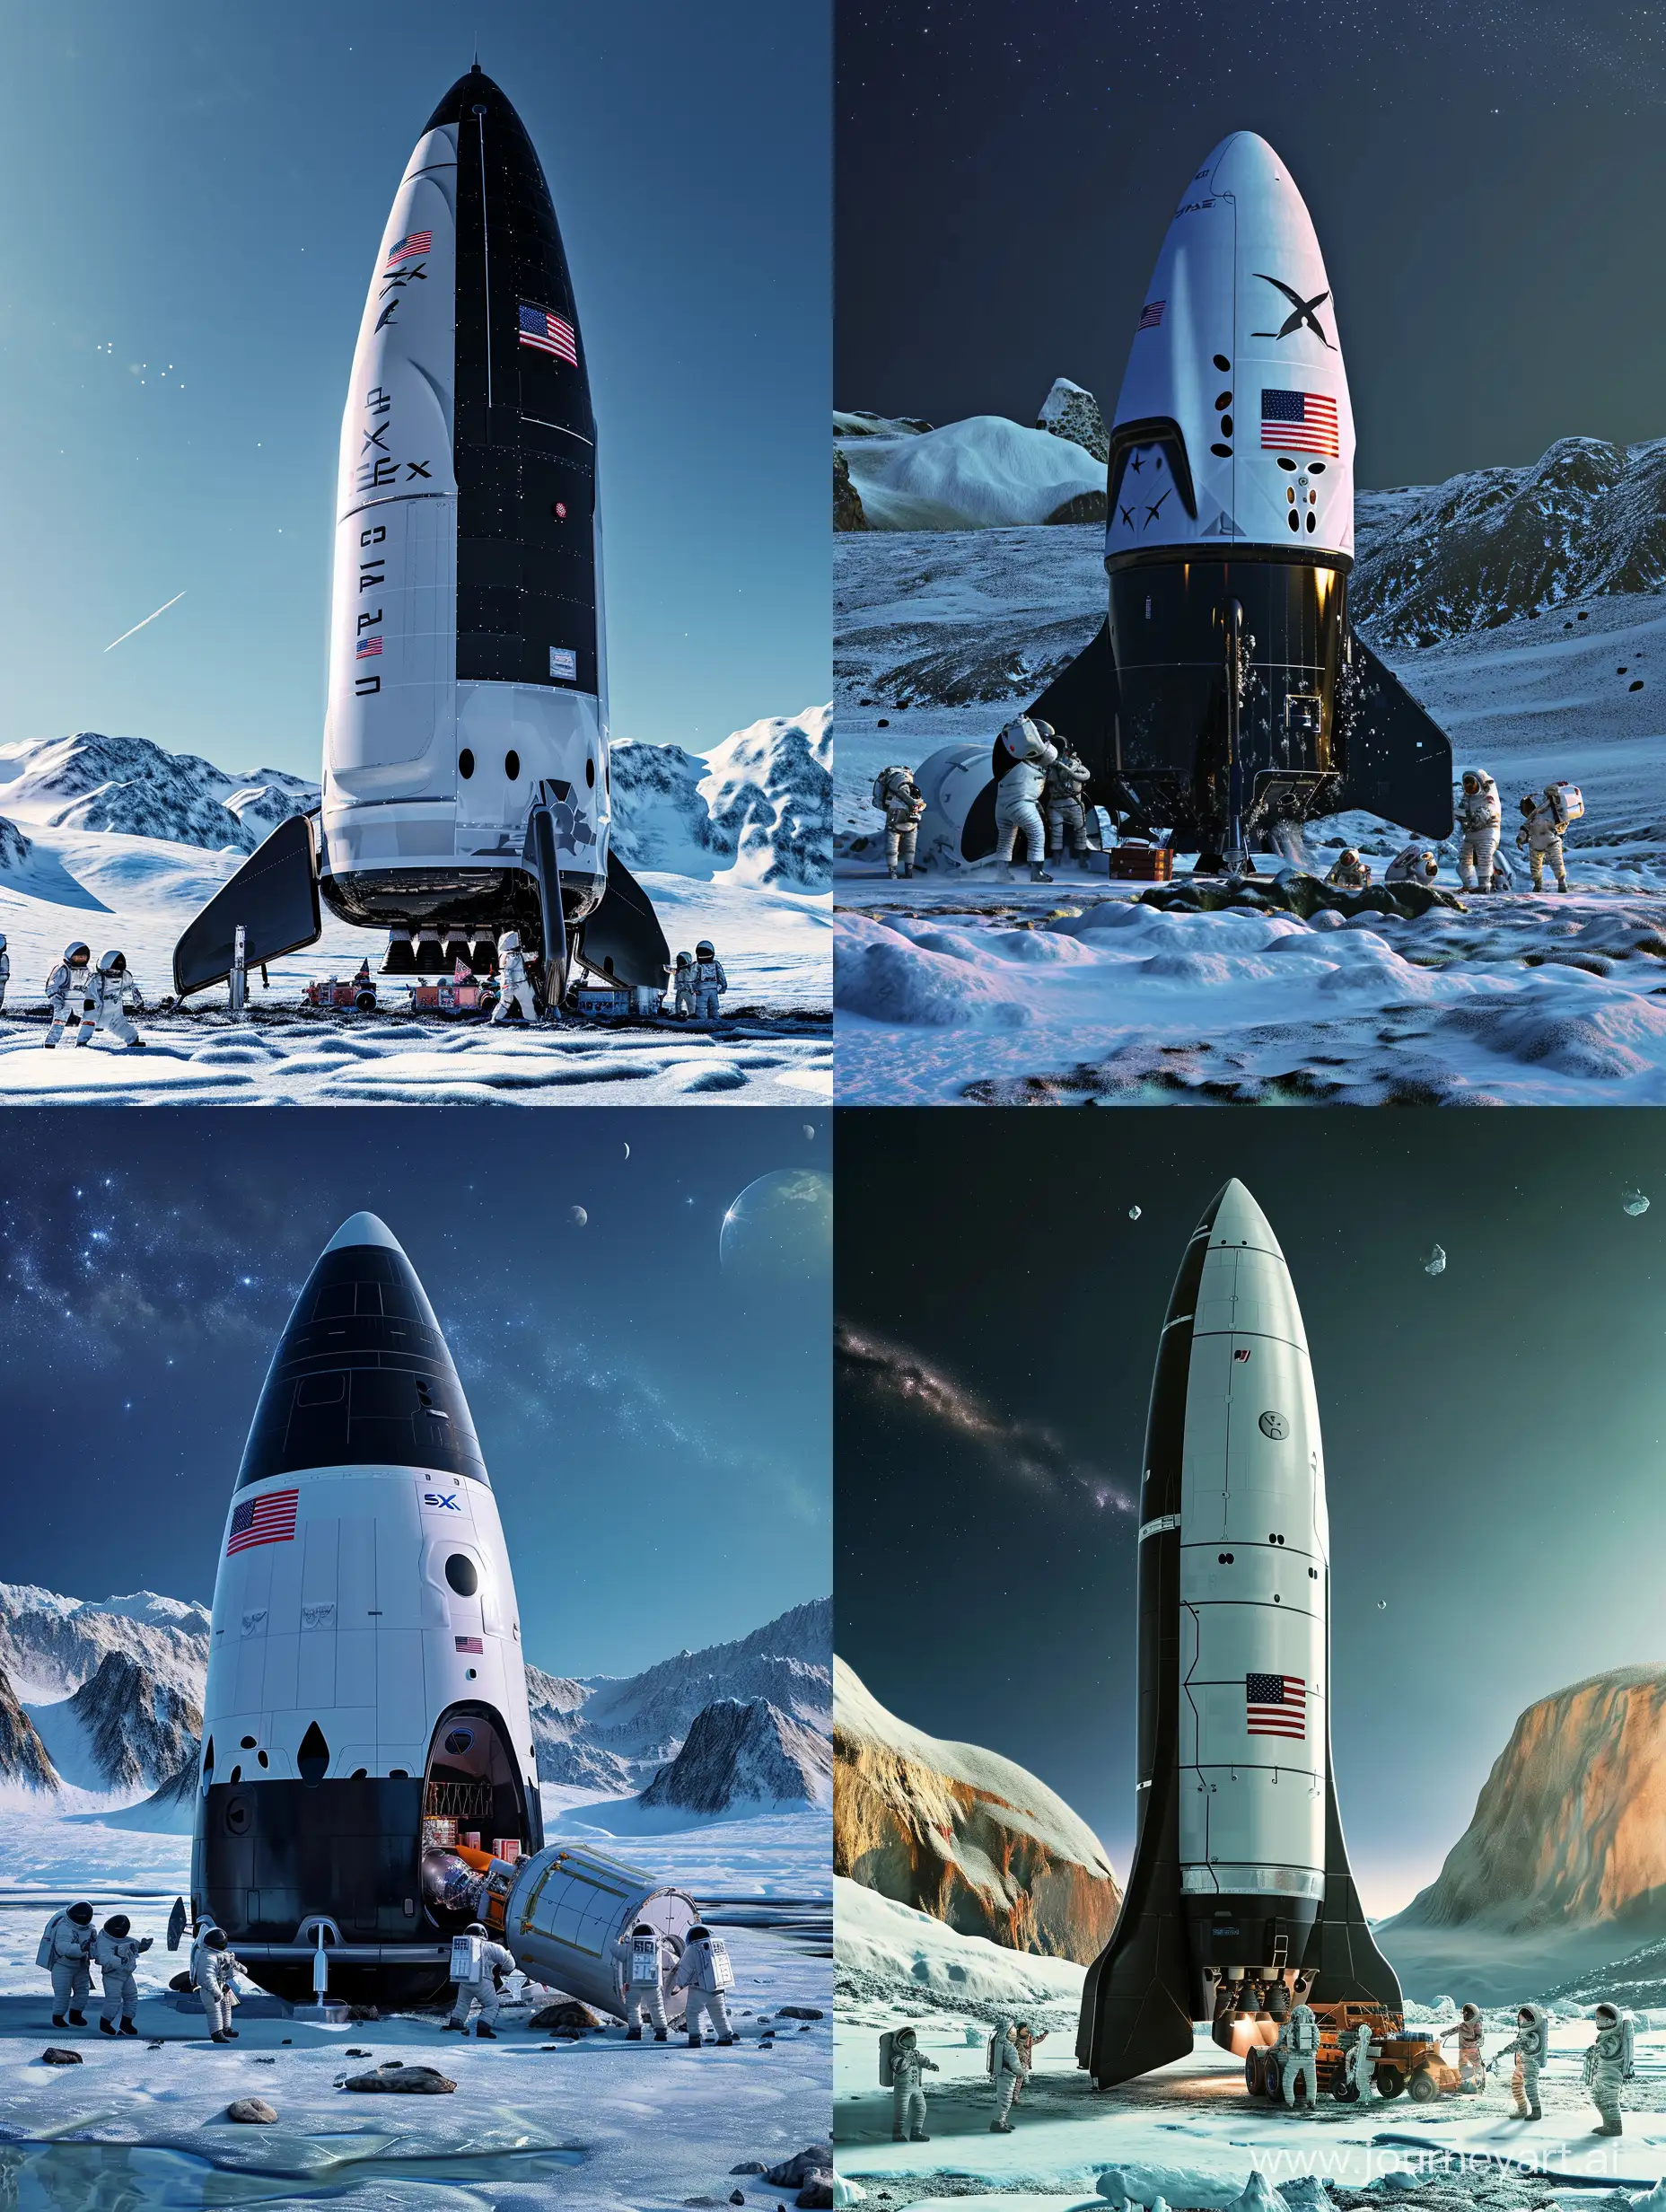 A realistic picture of the SpaceX Starship on the icy surface of Europa(Jupiter's Moon). The SpaceX Starship is painted in white and black with an American flag on its side like the Saturn V. There are astronauts around the rocket unloading supplies. In color.

